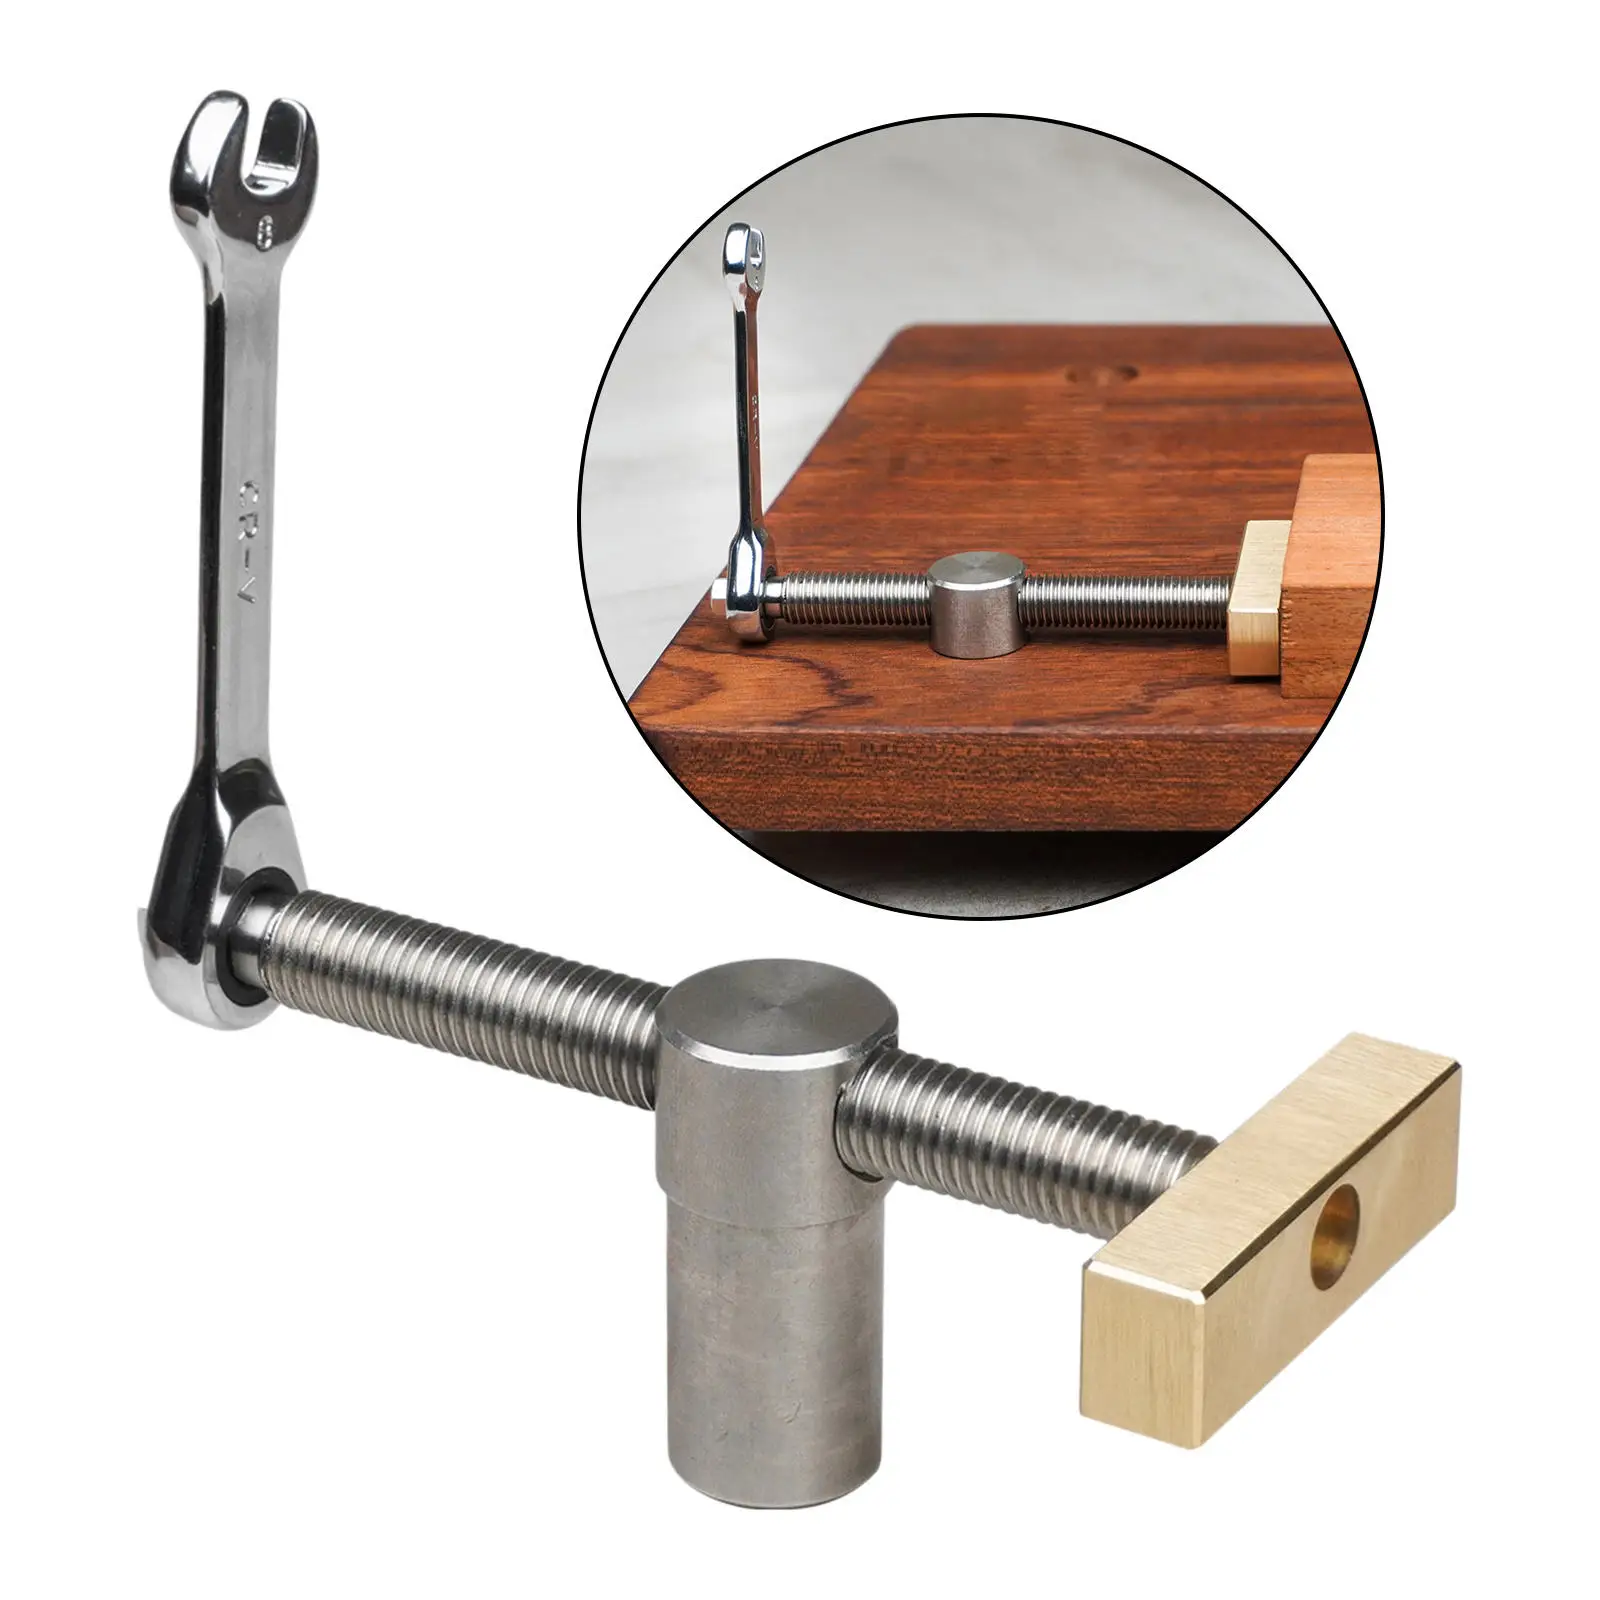 Woodworking Desktop Vise Fixed Locking Accessories Clamp for Carpenter